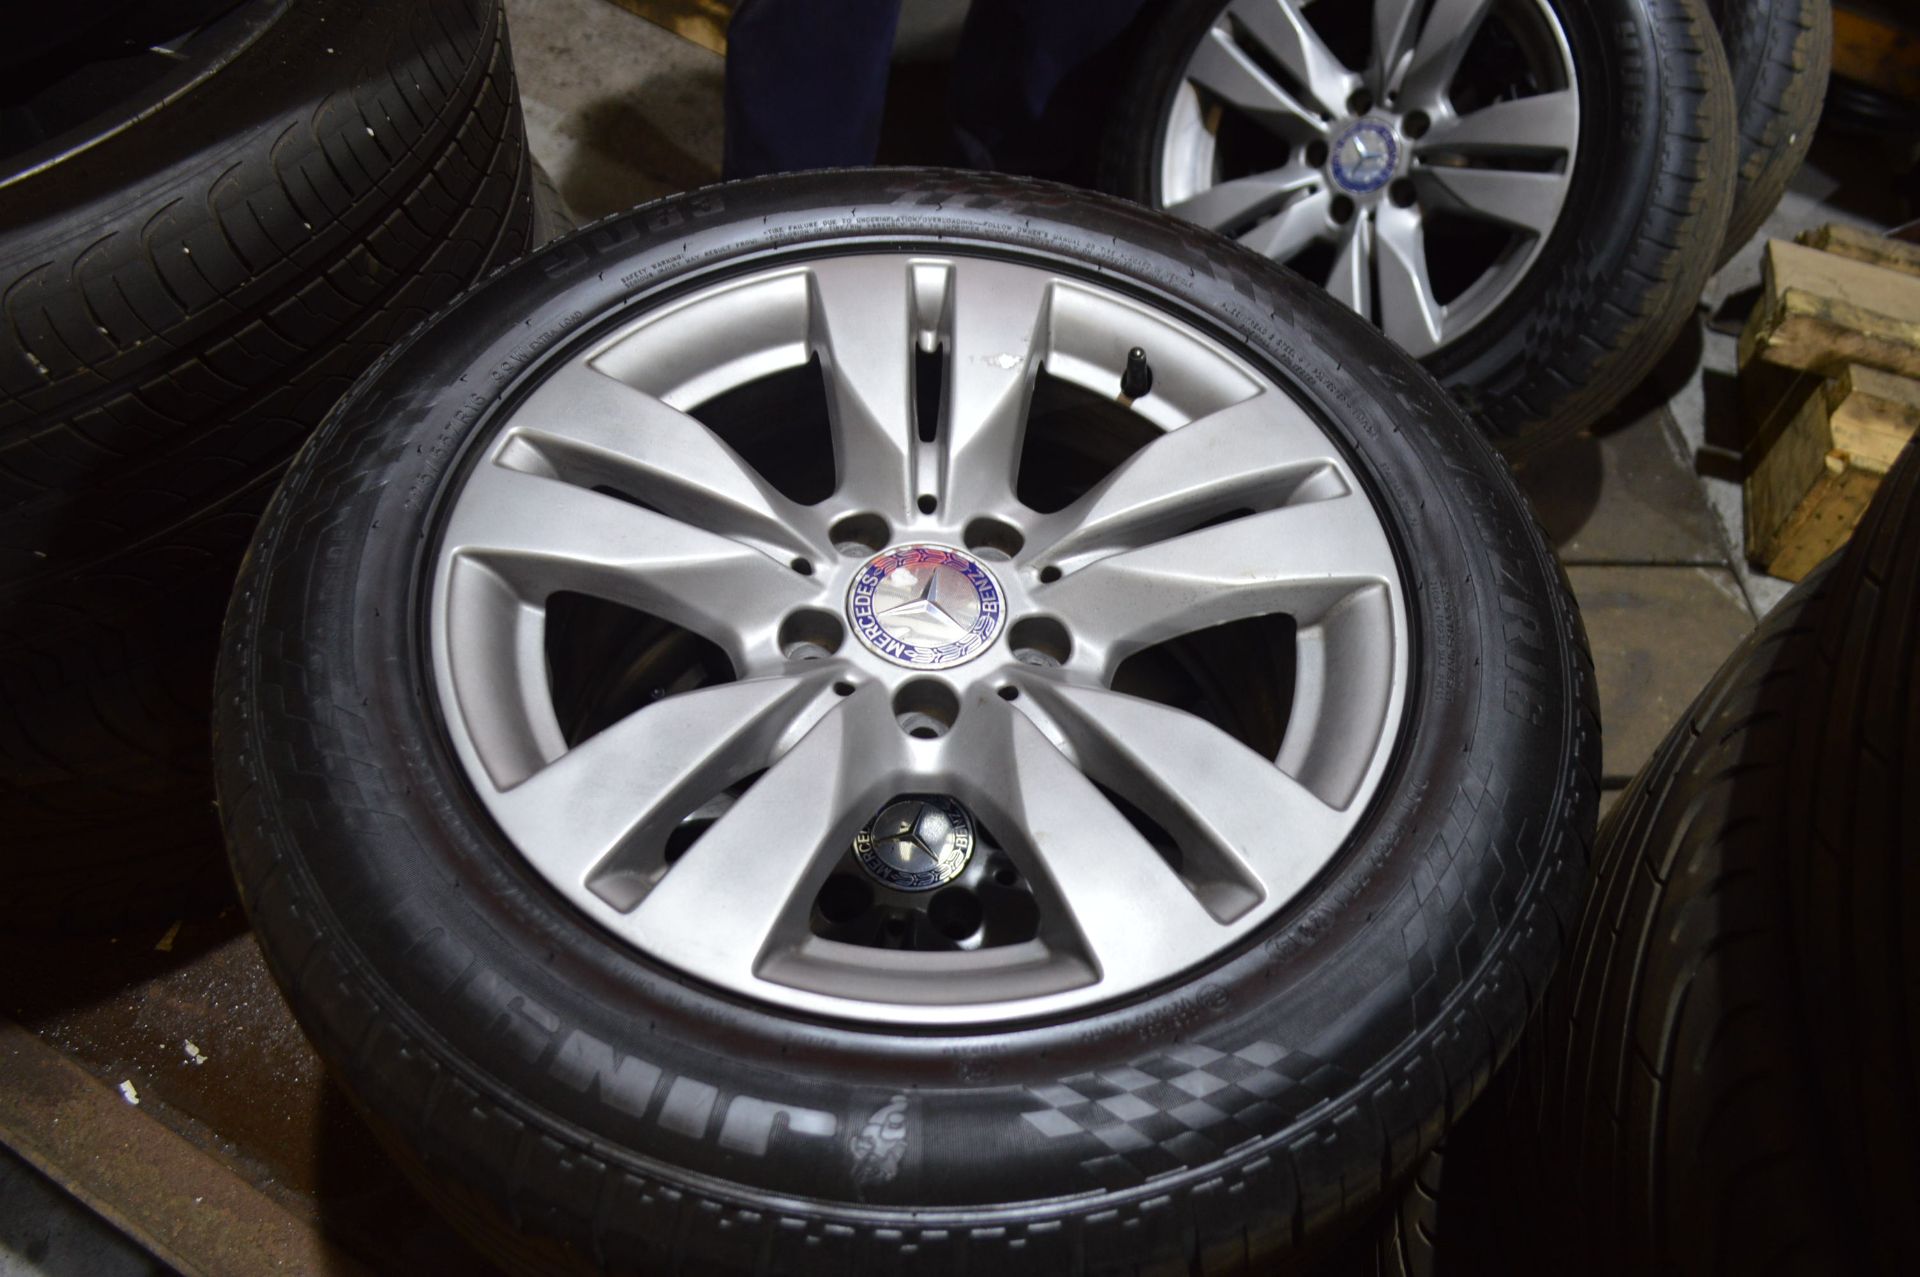 16" MERCEDES-BENZ ALLOY WHEELS - REMOVED FROM 2012 MERCEDES E CLASS *NO VAT* - Image 2 of 6